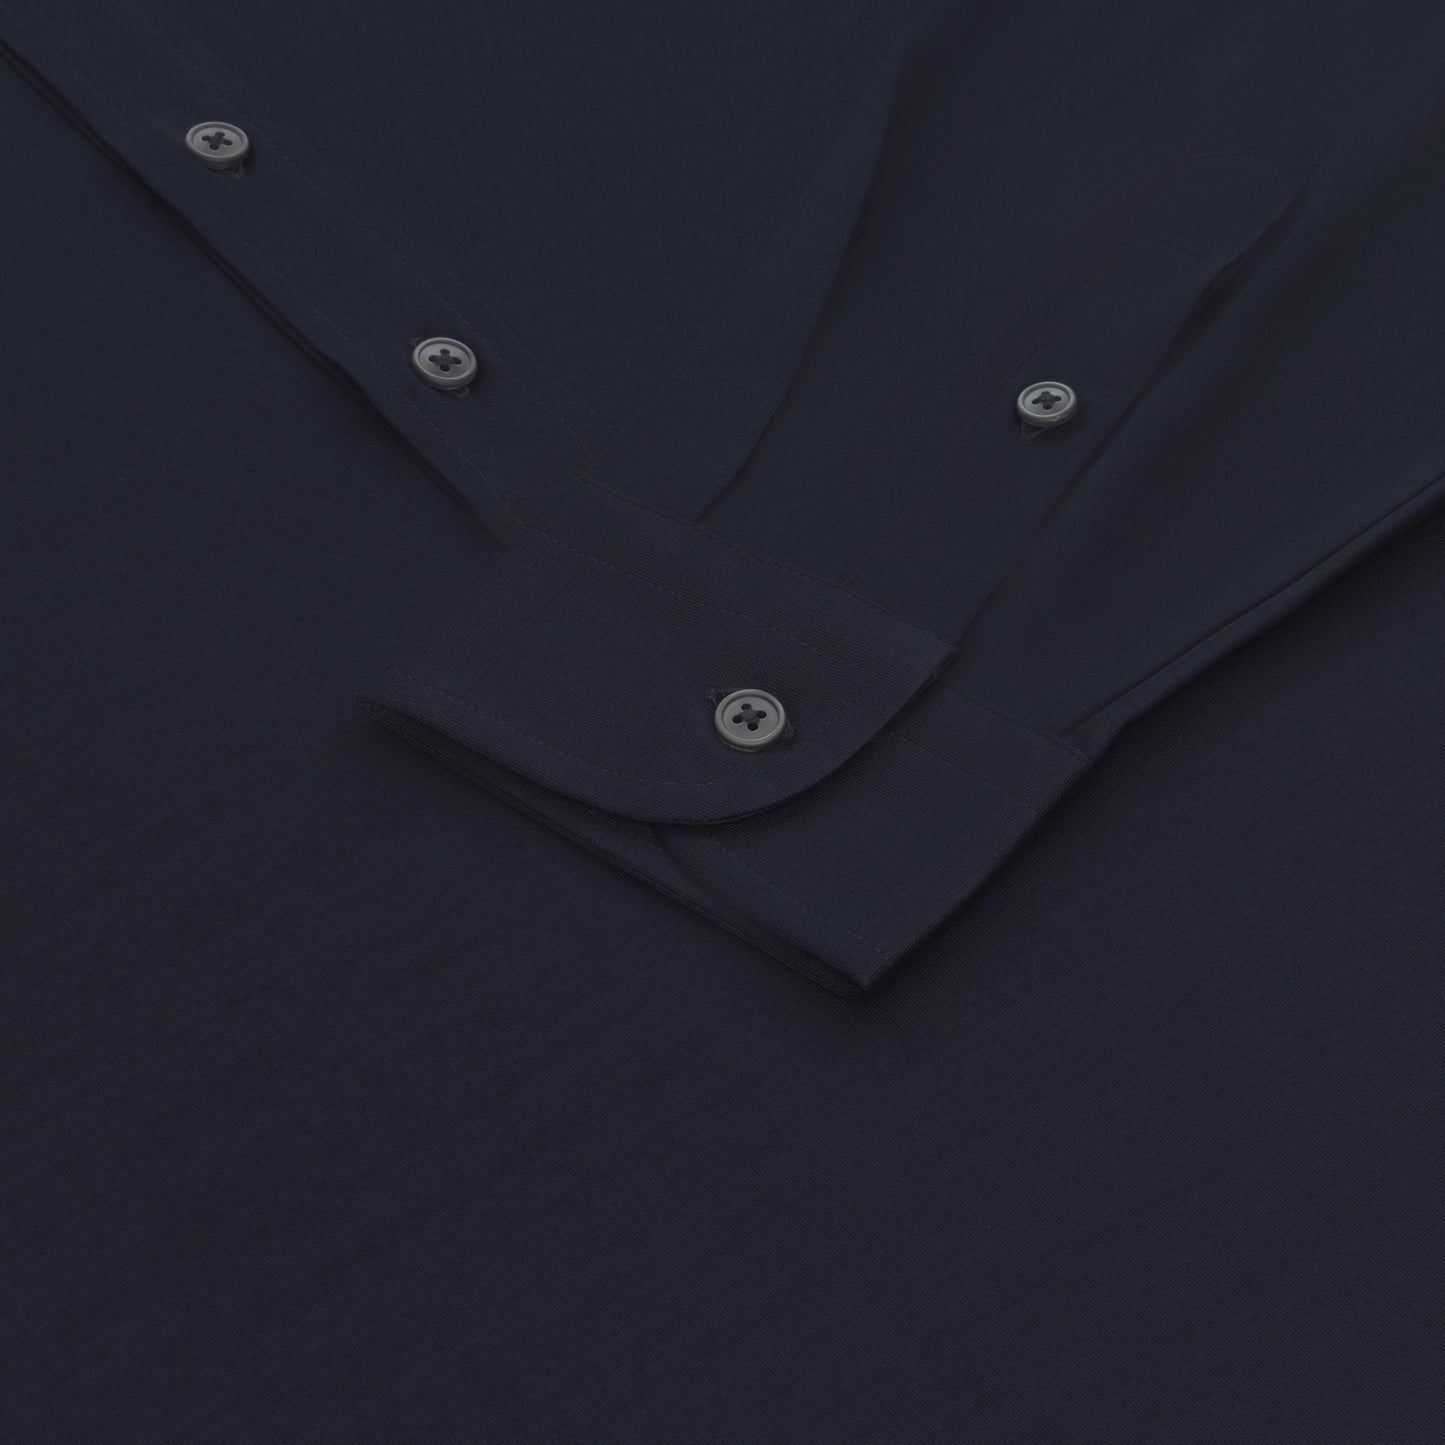 Cotton Polo Shirt in Navy Blue with Long Placket